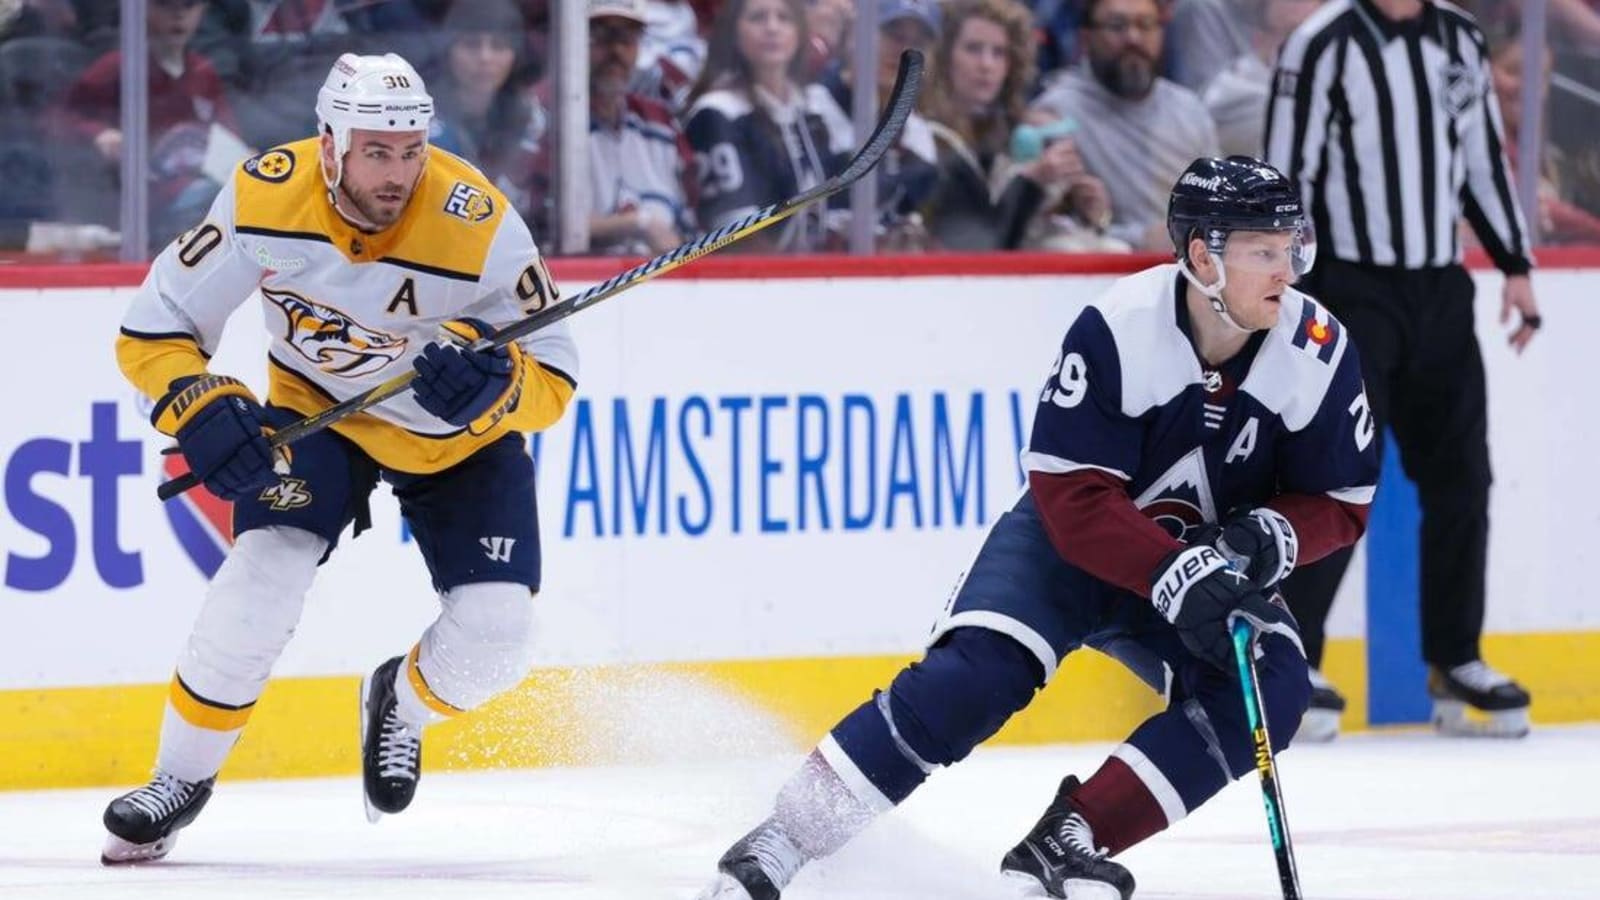 Avalanche defeat Predators to clinch playoff spot